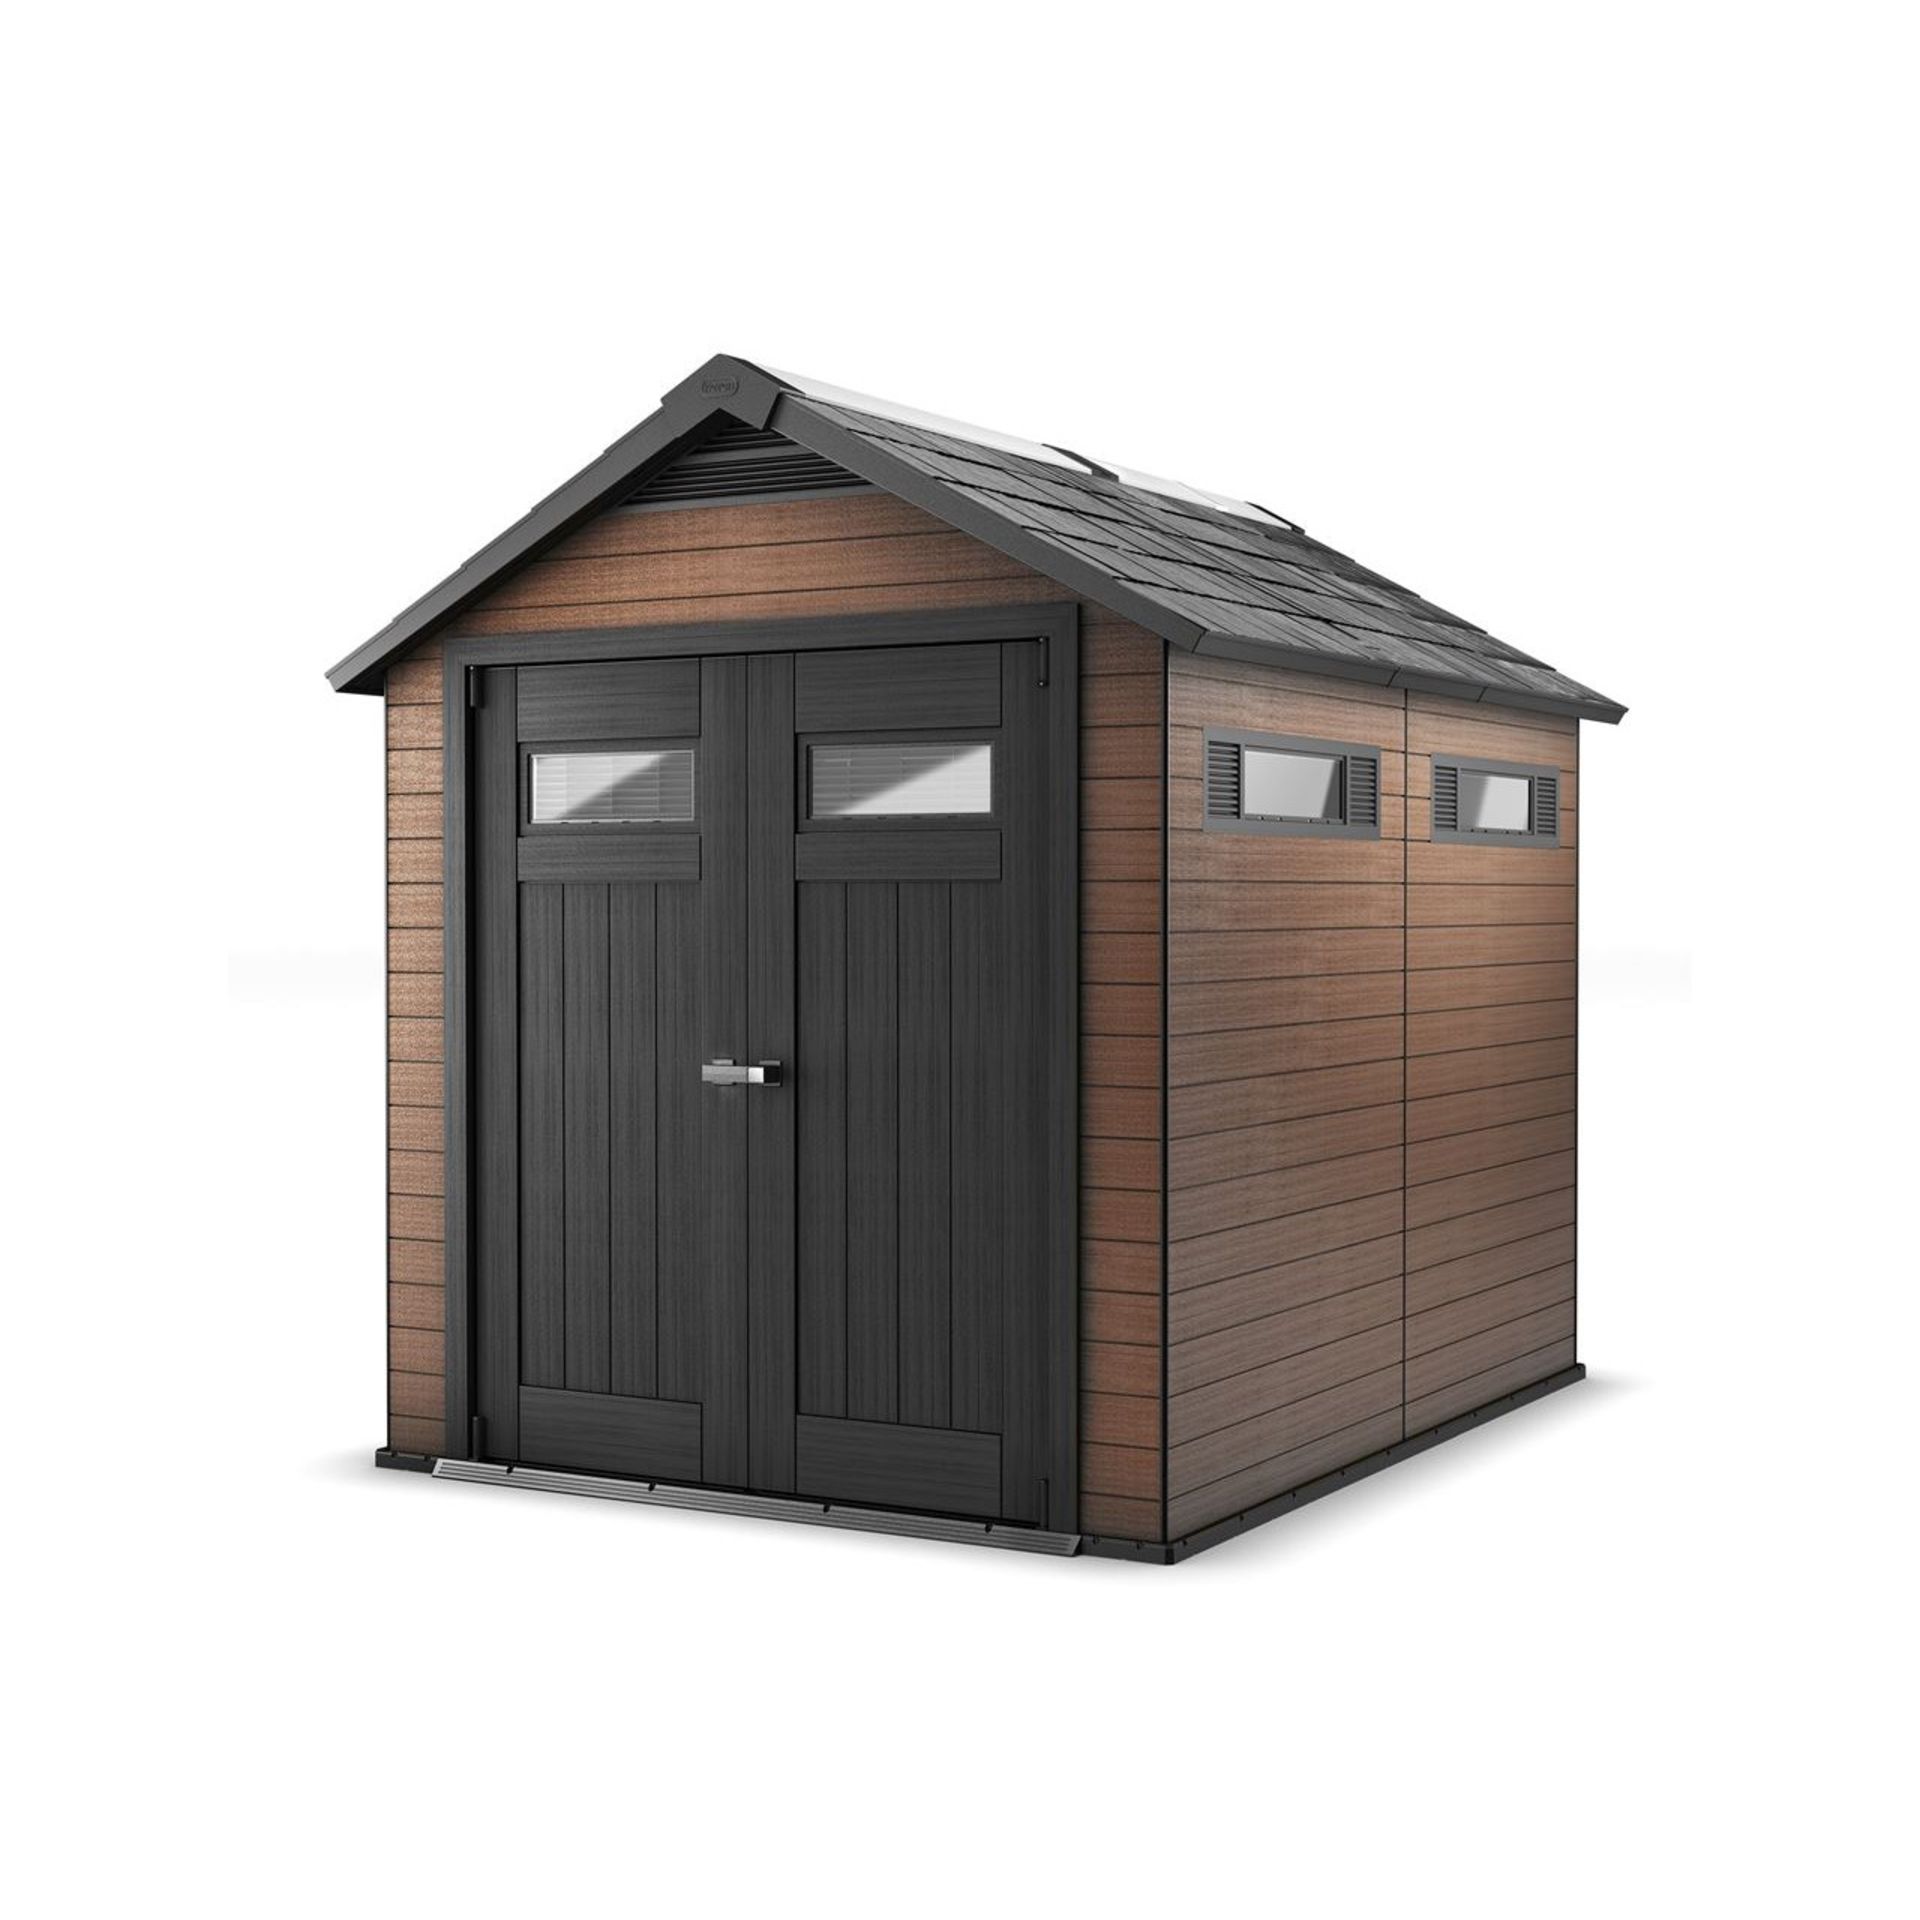 Keter Fusion 757 Garden Shed